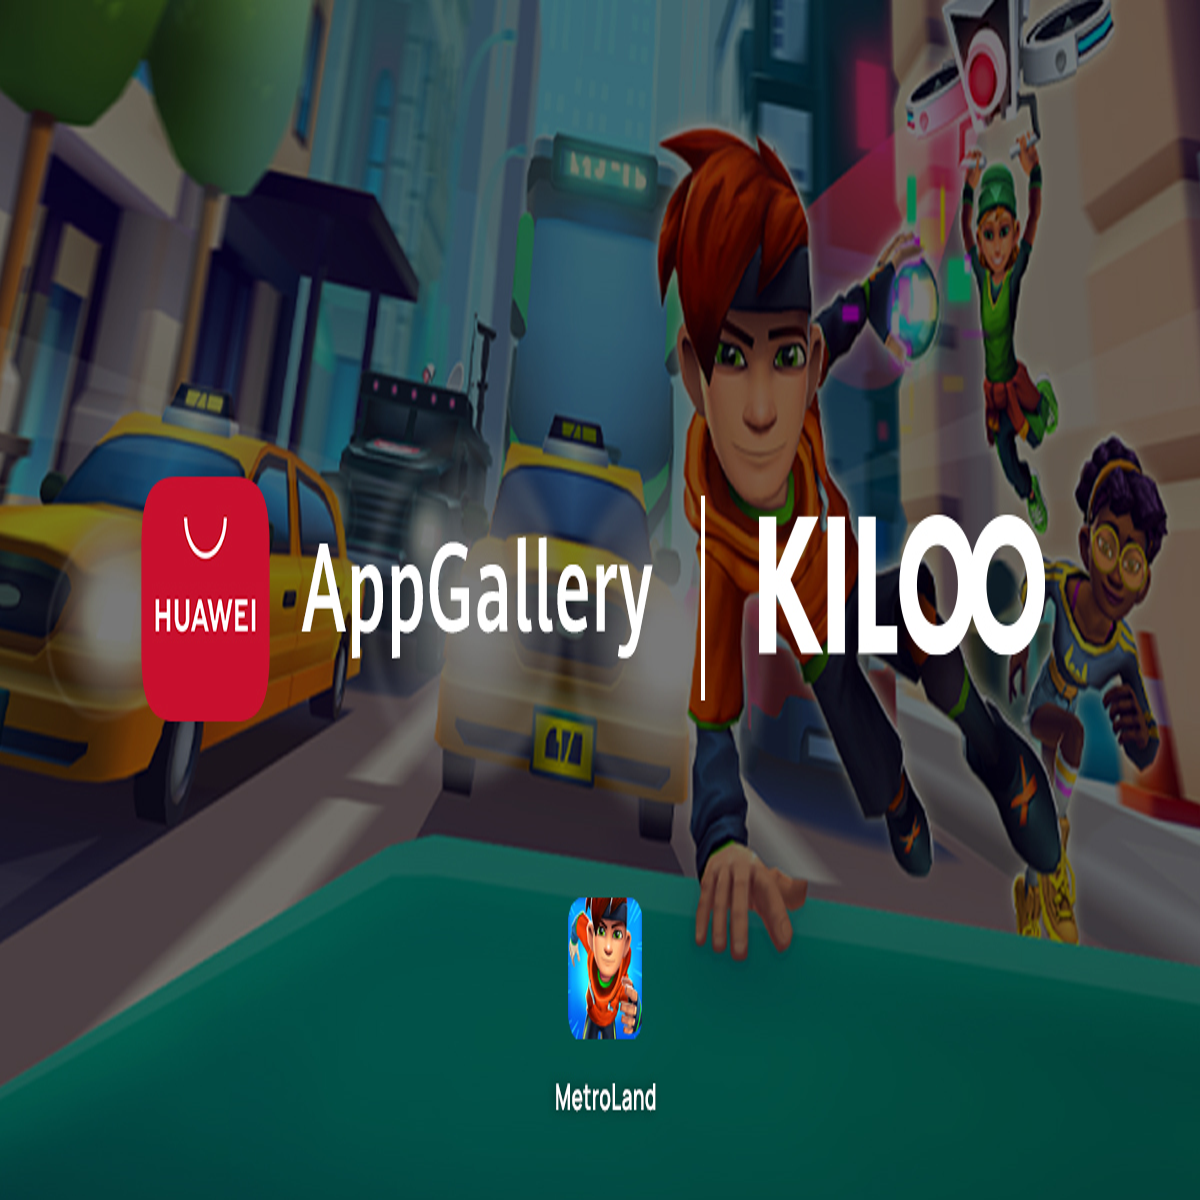 MetroLand is a new endless runner from Kiloo, co-developers of